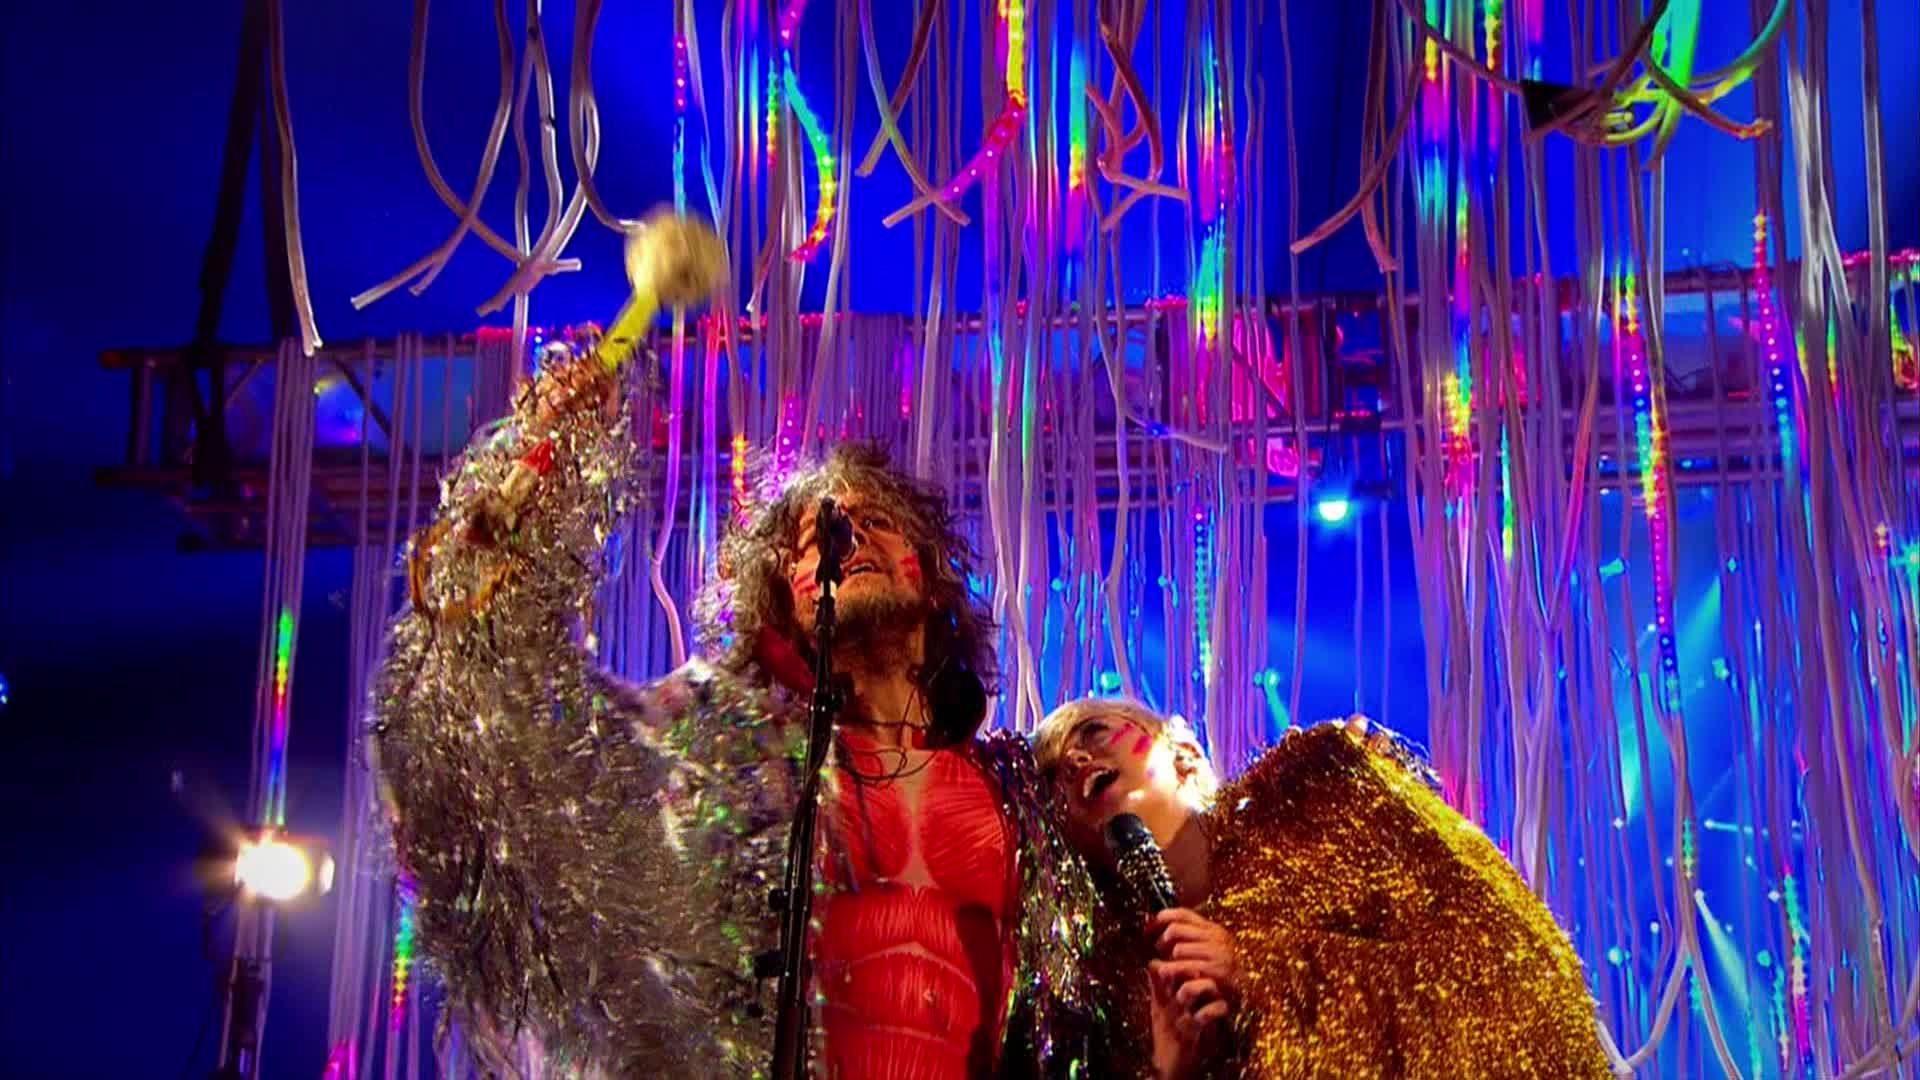 Miley Cyrus [ft The Flaming Lips] - 2014-05-18, Billboard Music Awards - 1080 TS - LSD preview 27